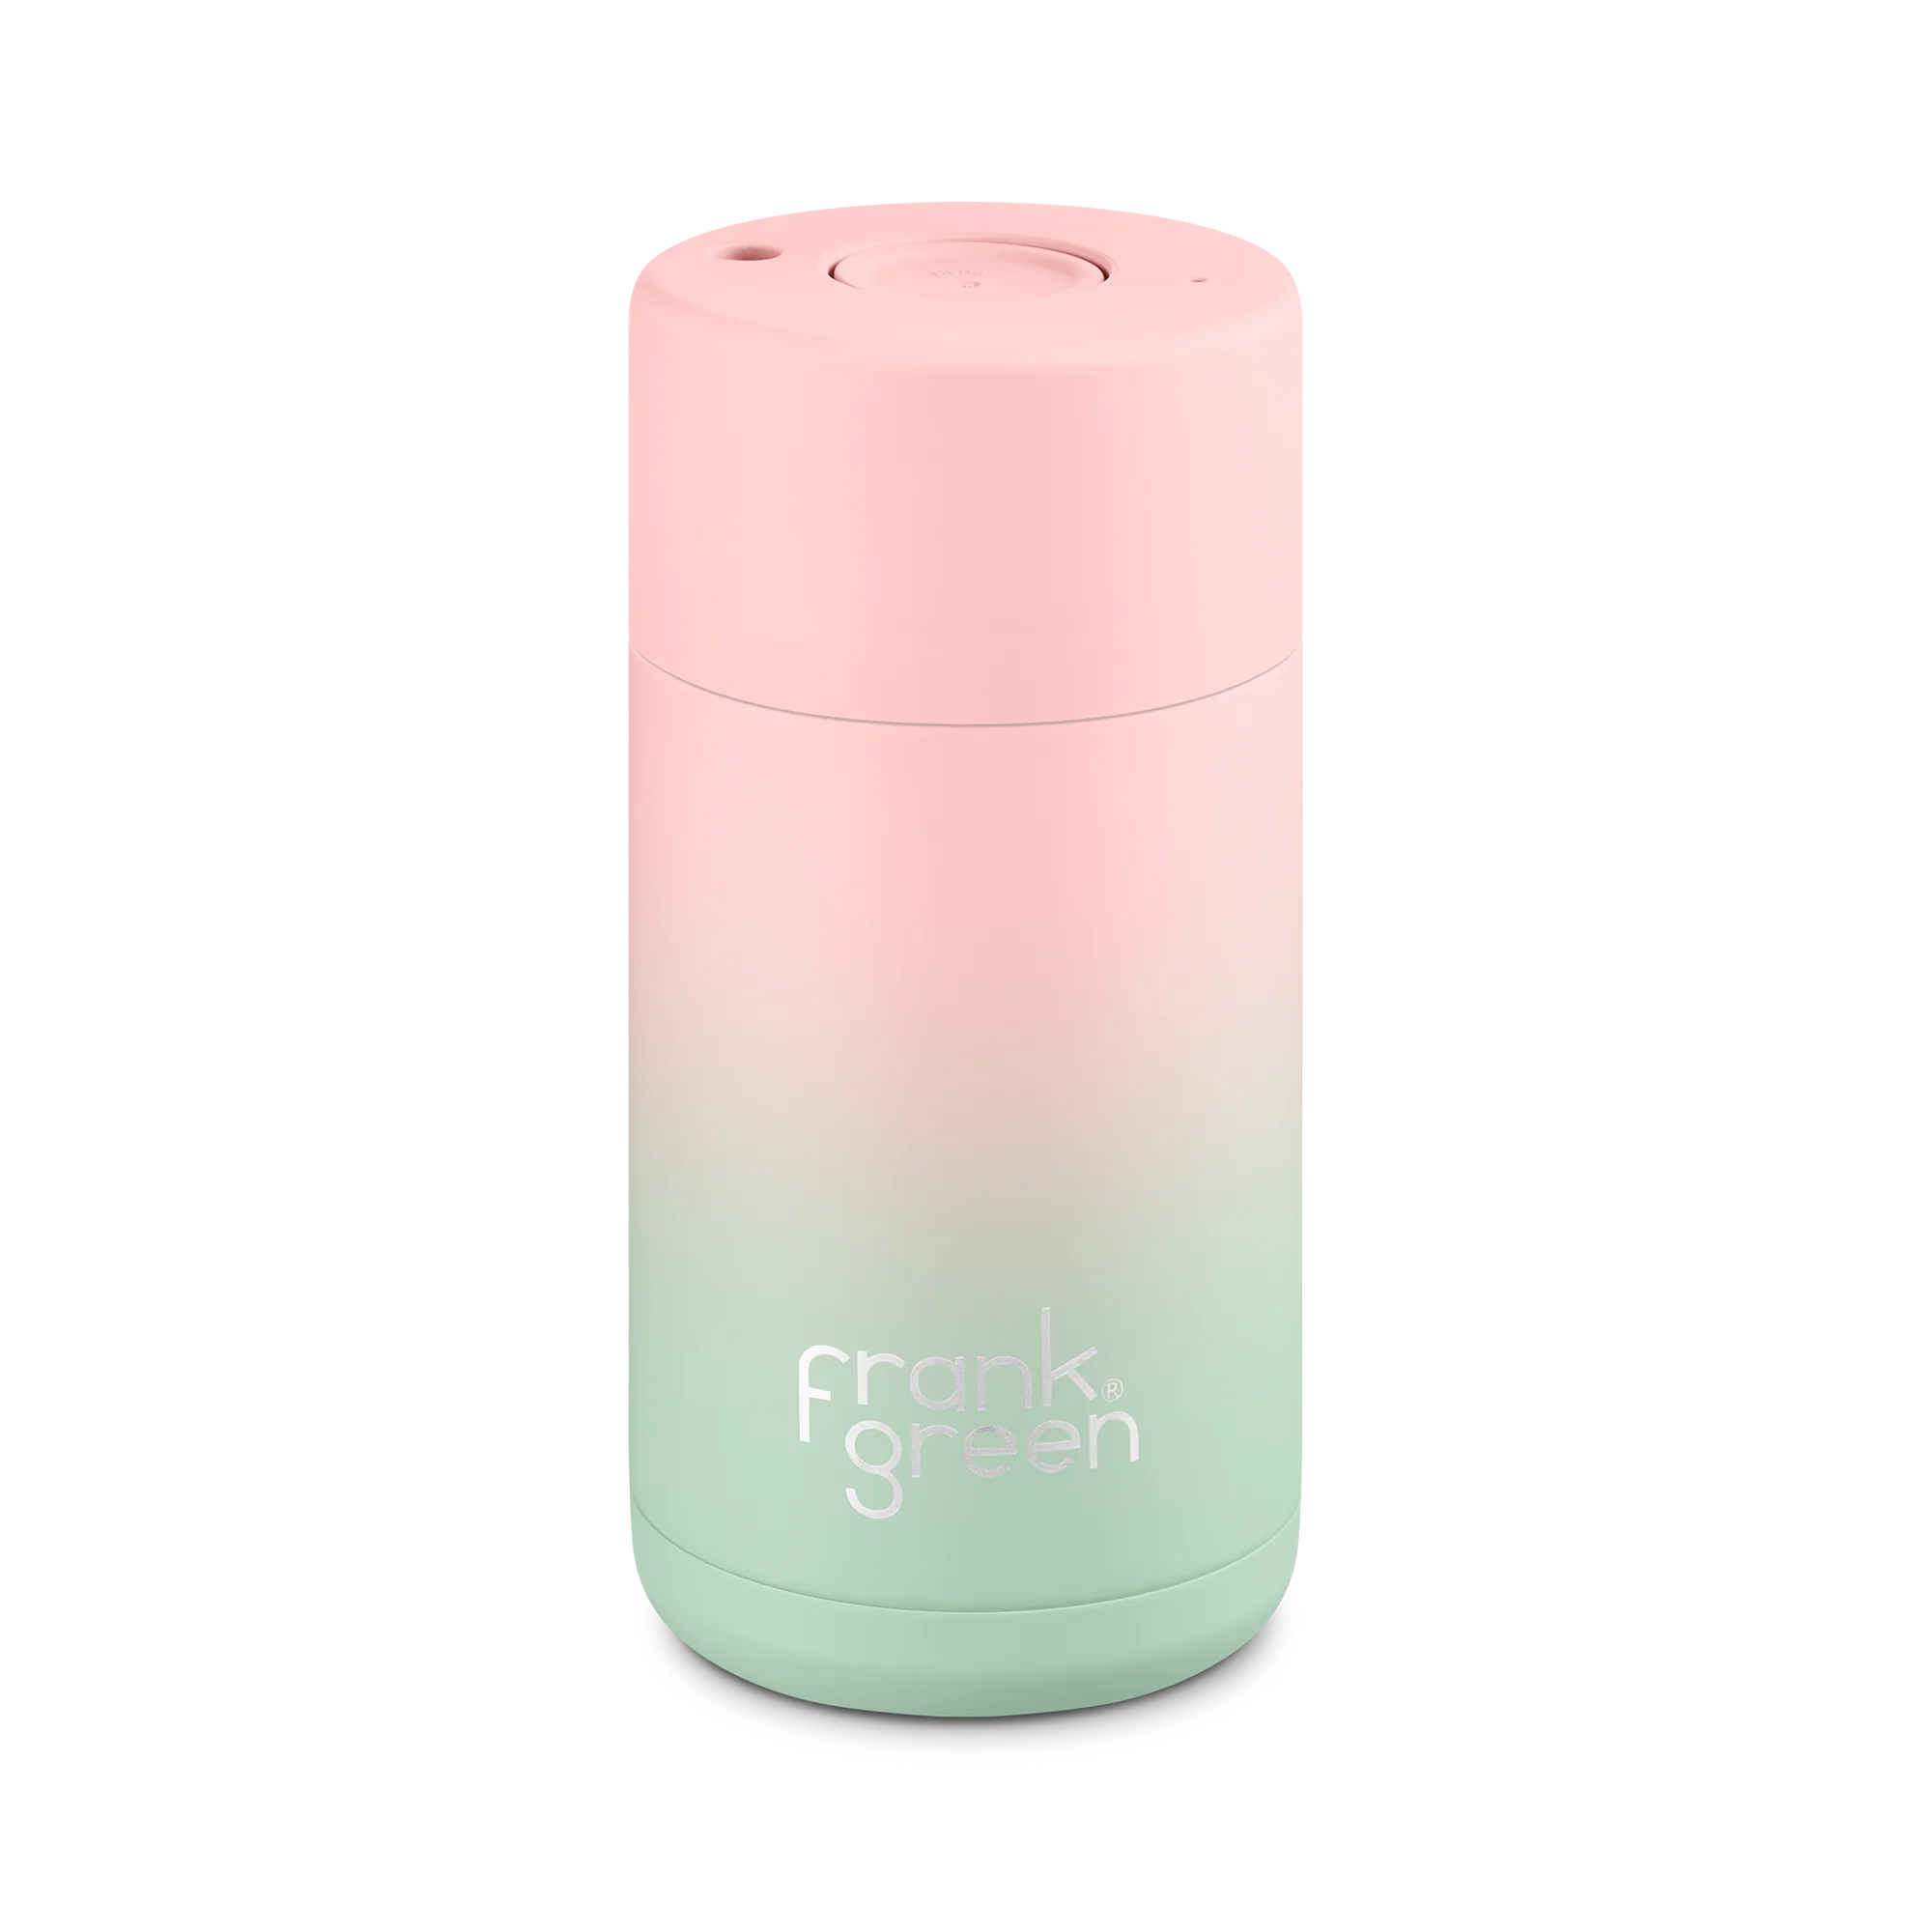 Limited Edition Gradient Ceramic Reusable Cup | 12oz 355ml